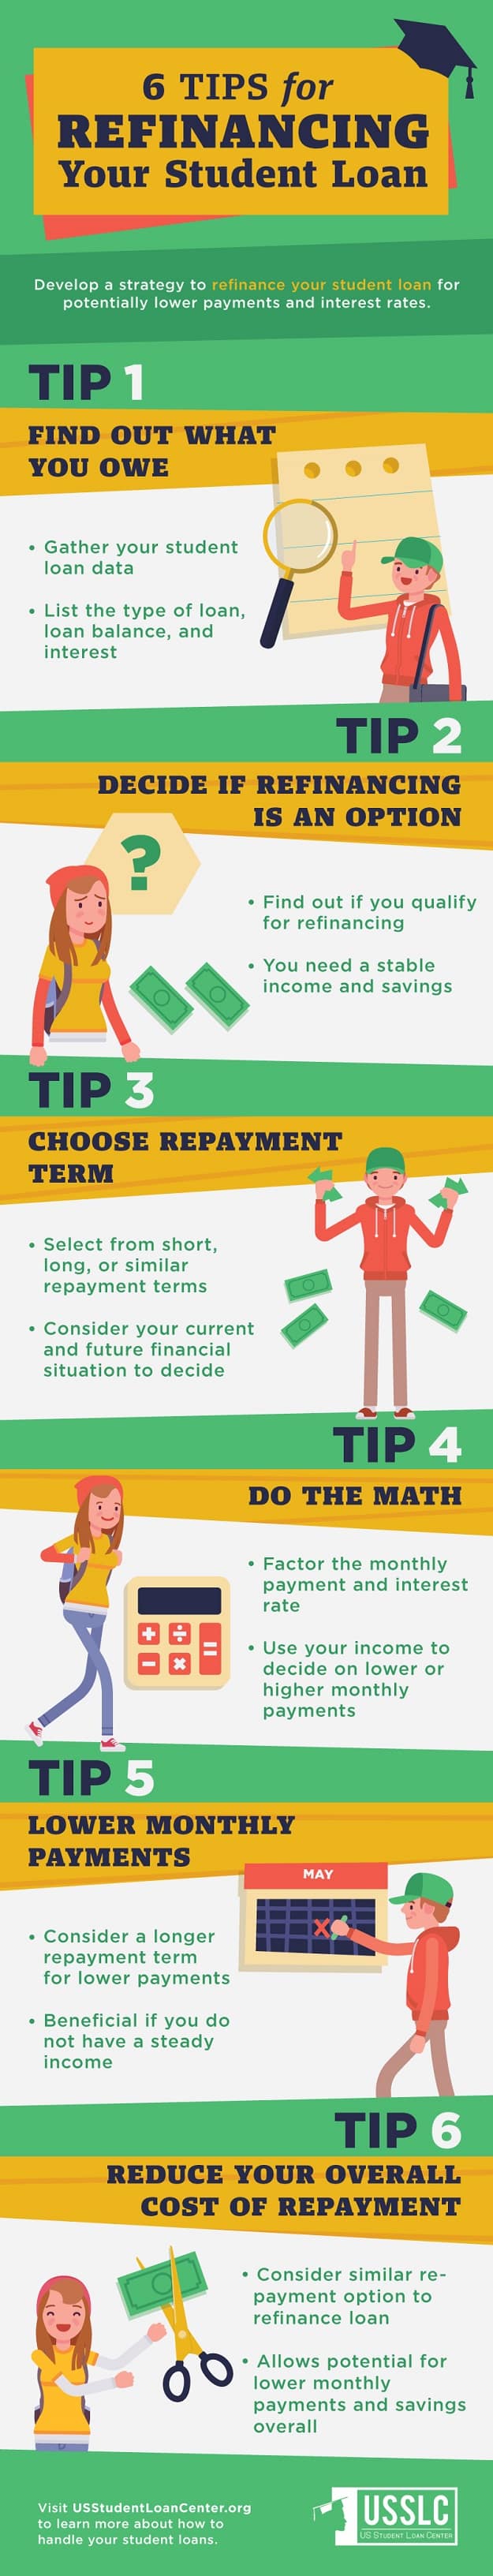 6 Tips for Refinancing Your Student Loan | The Best of 2017 on US Student Loan Center